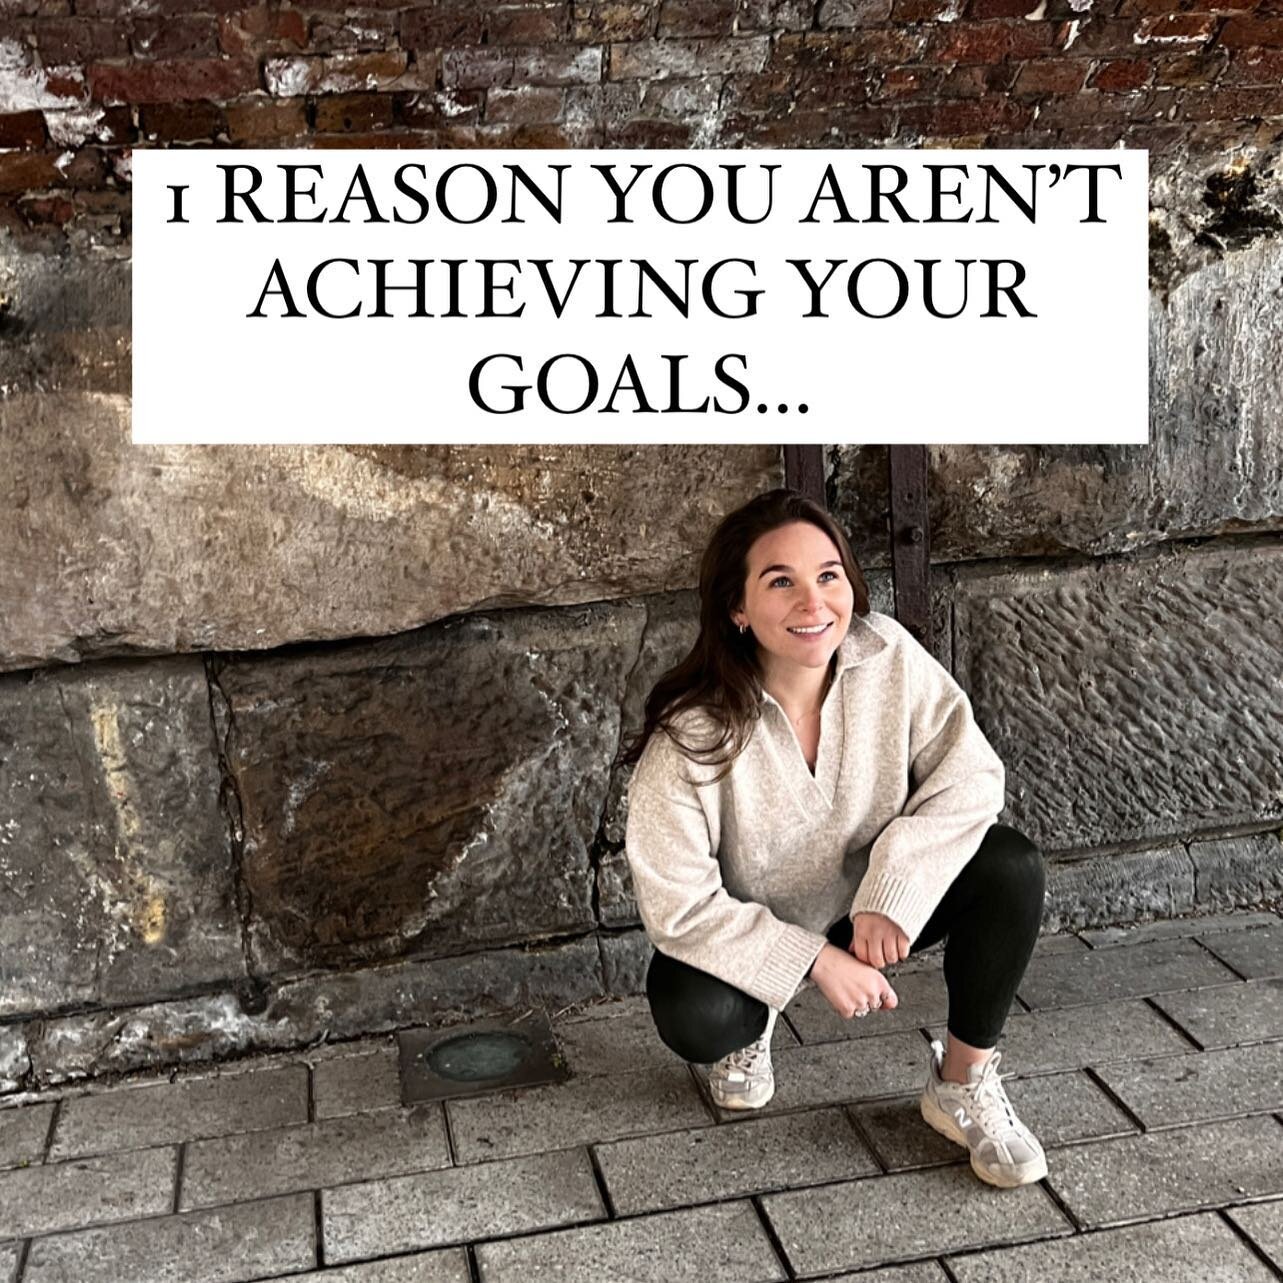 HOW TO FIND THE MOTIVATION TO KEEP MOTIVATED 🔥 

It's all very well and good, people like me preaching about keeping motivated throughout your fitness journey, but sometimes this can be the most difficult part 

I believe that finding your &quot;WHY